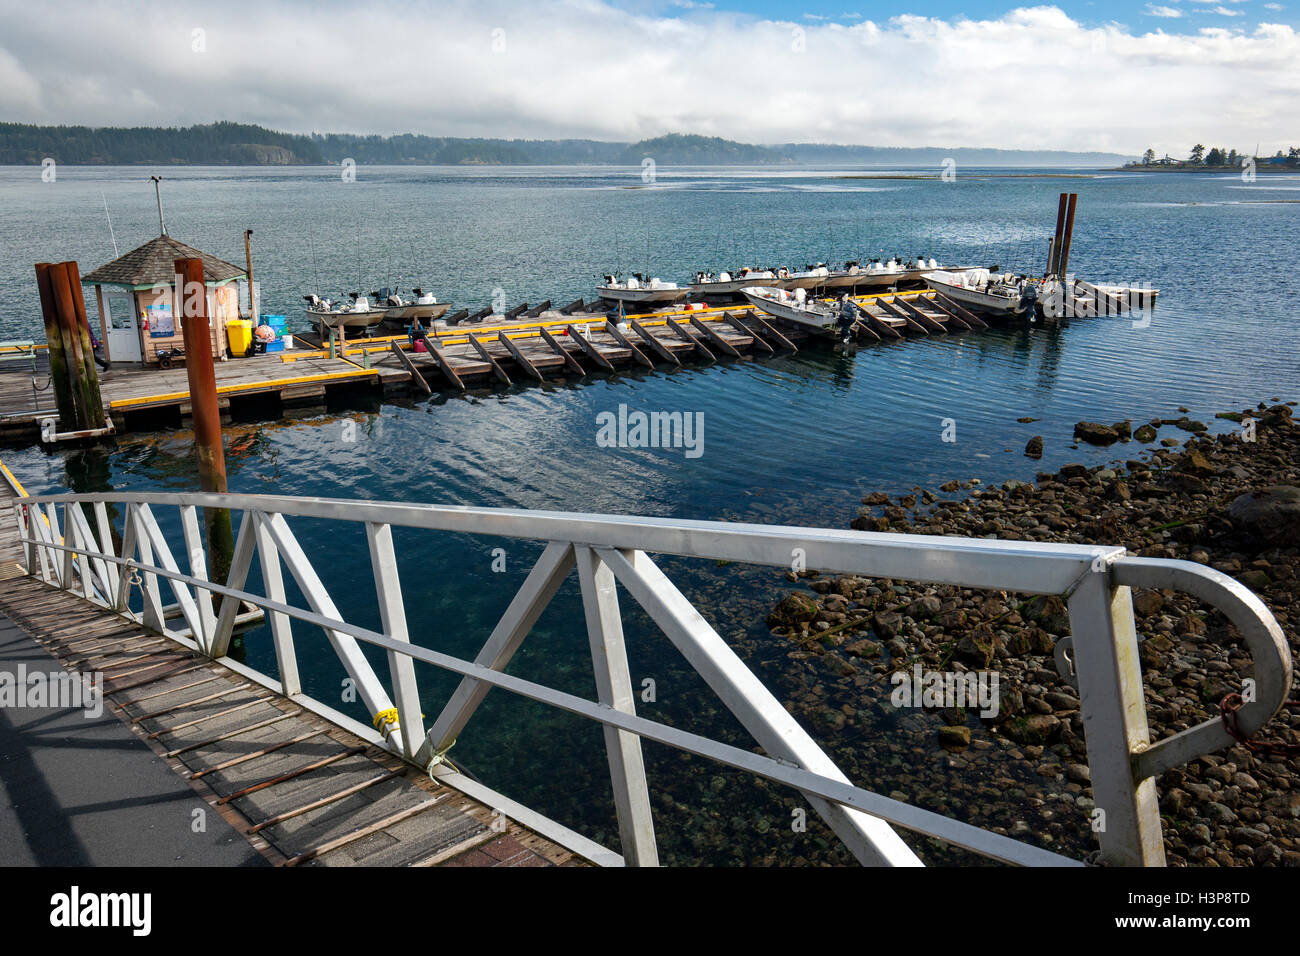 Dock at Painter's Lodge, Campbell River, Vancouver Island, British Columbia, Canada Stock Photo